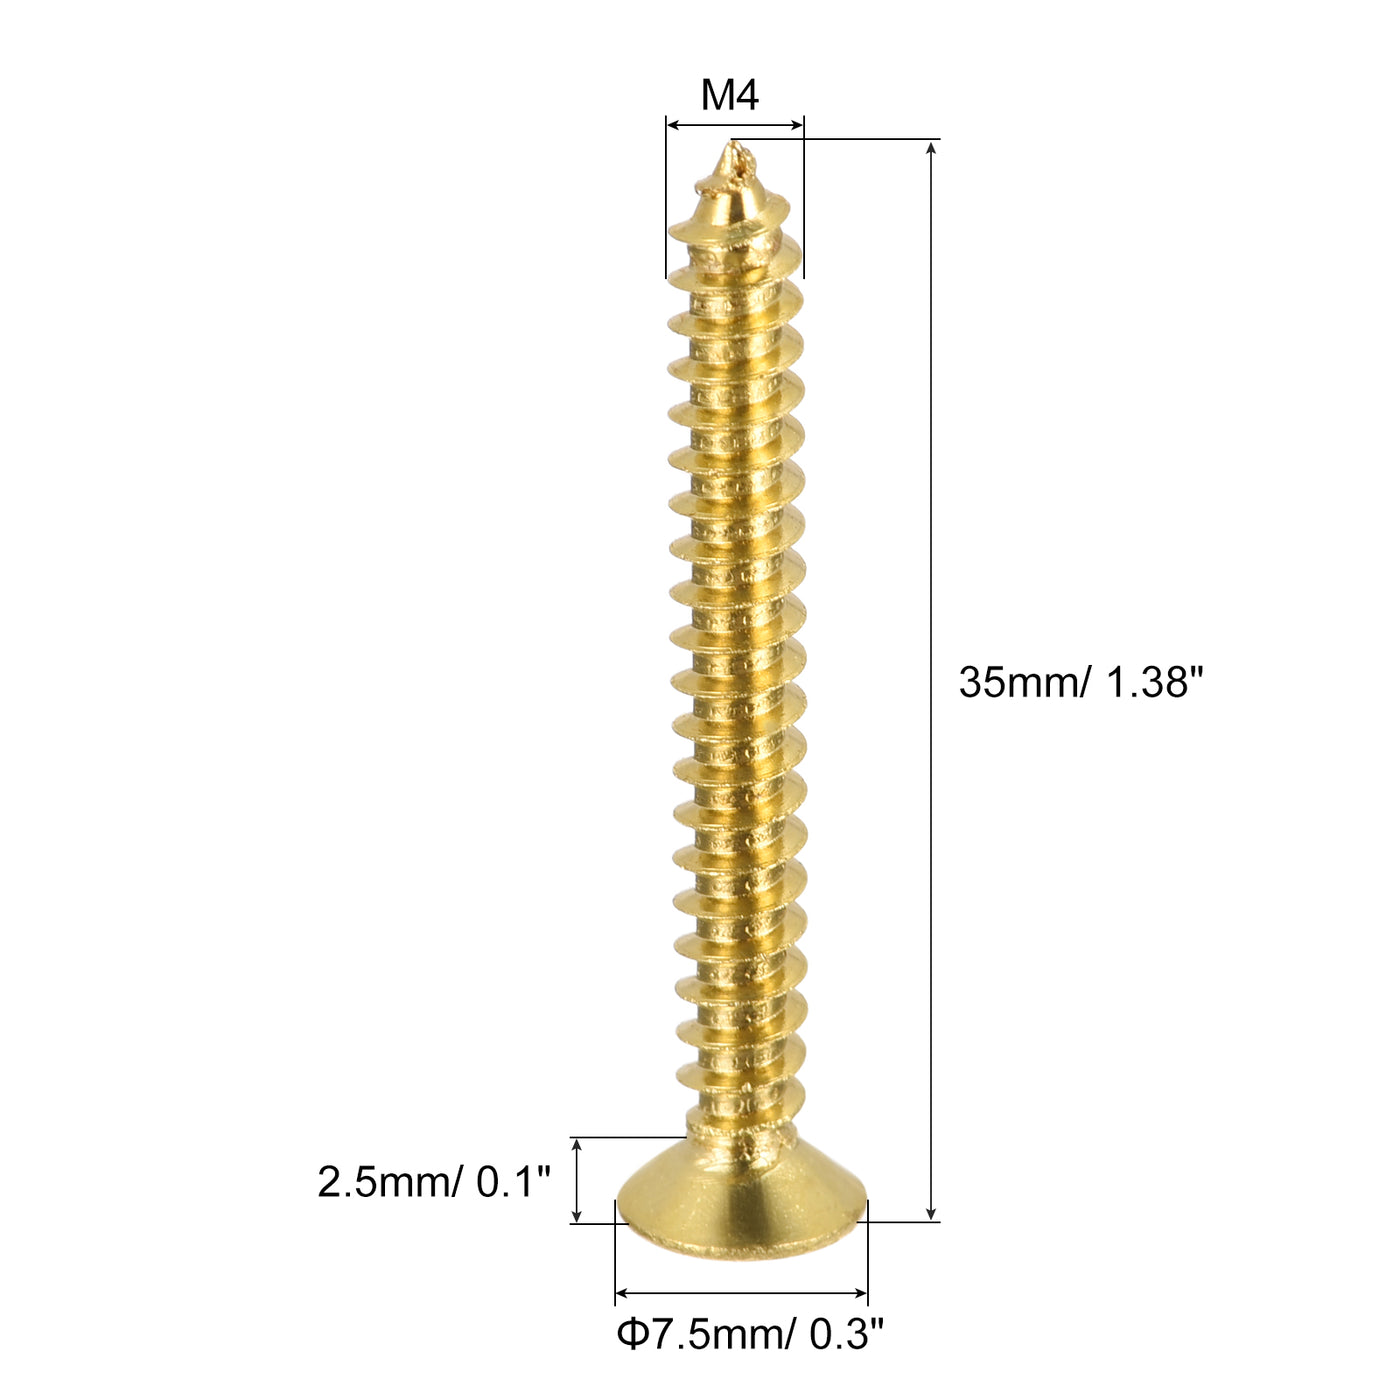 uxcell Uxcell Brass Wood Screws, M4x35mm Phillips Flat Head Self Tapping Connector for Door, Cabinet, Wooden Furniture 25Pcs